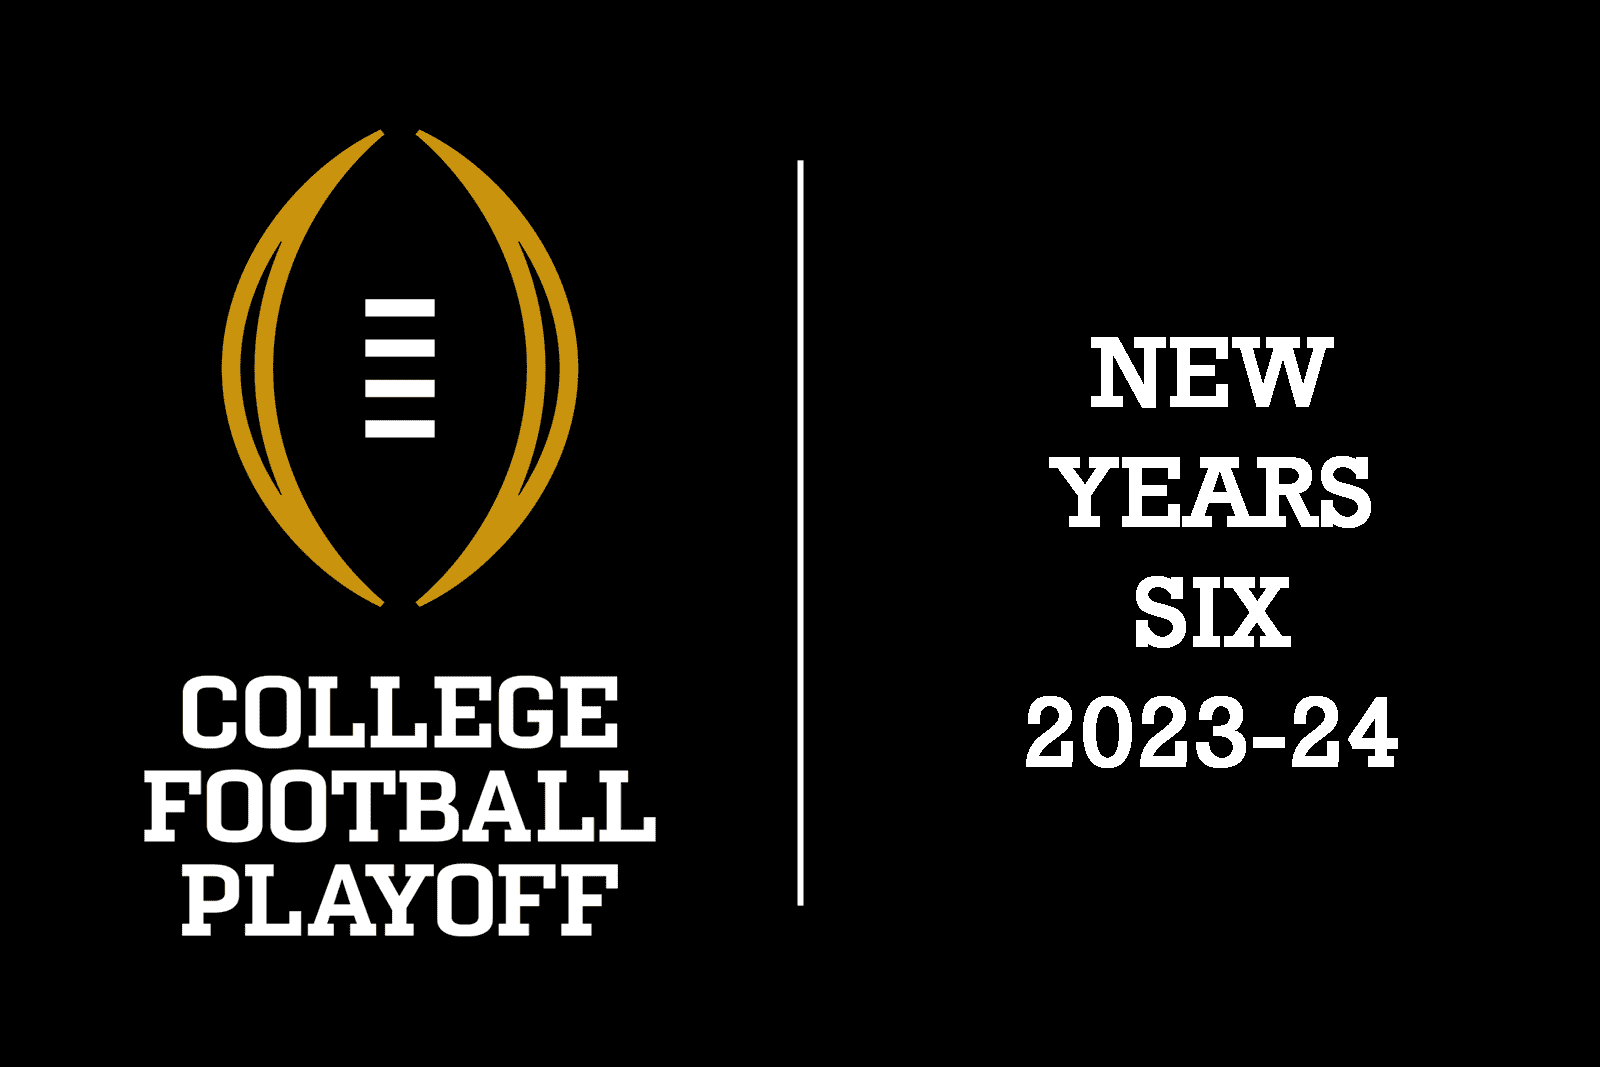 College Football Playoff: New Year's Six 2023-24